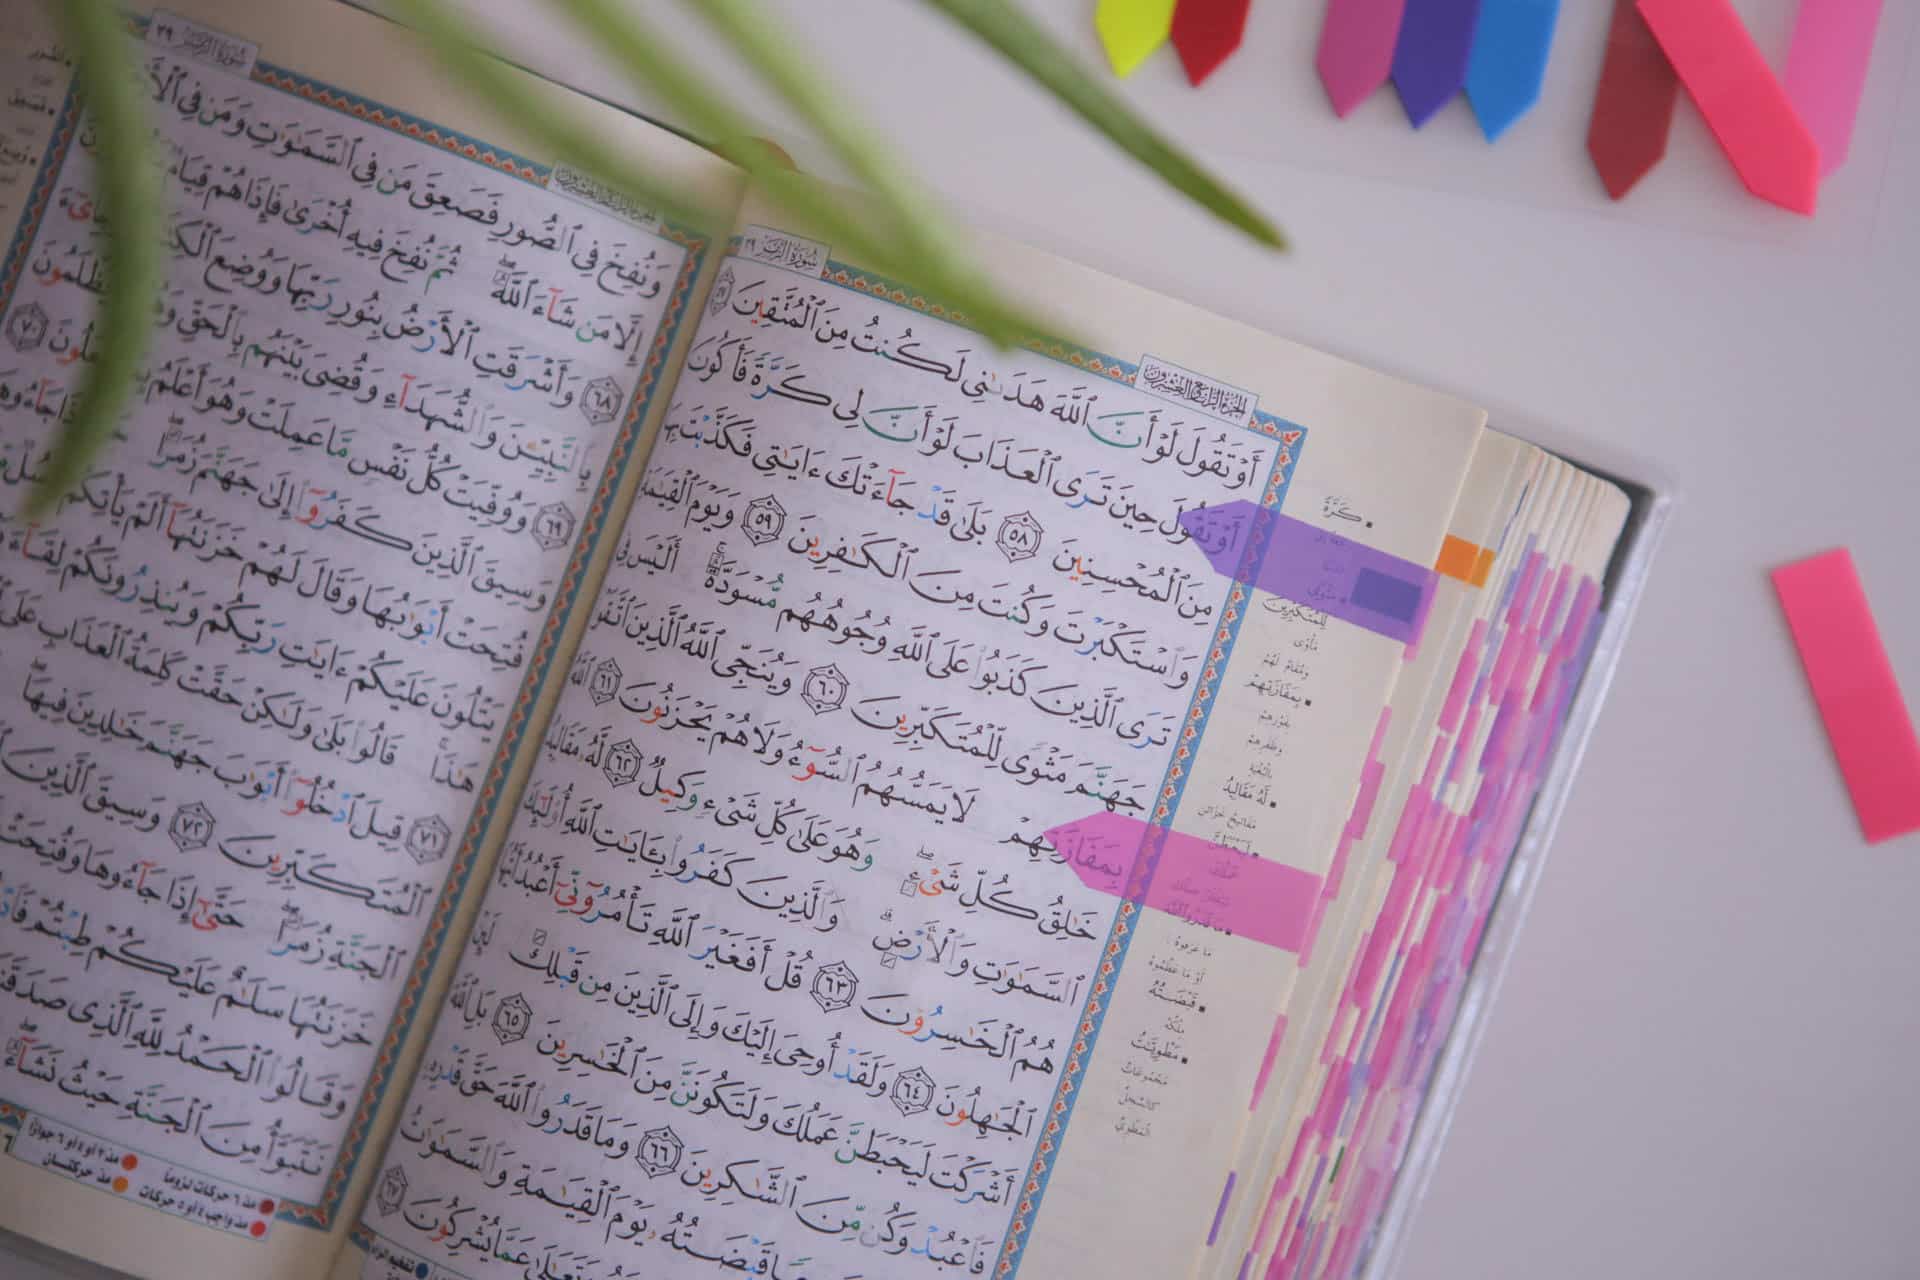 studying emotions in the Quran